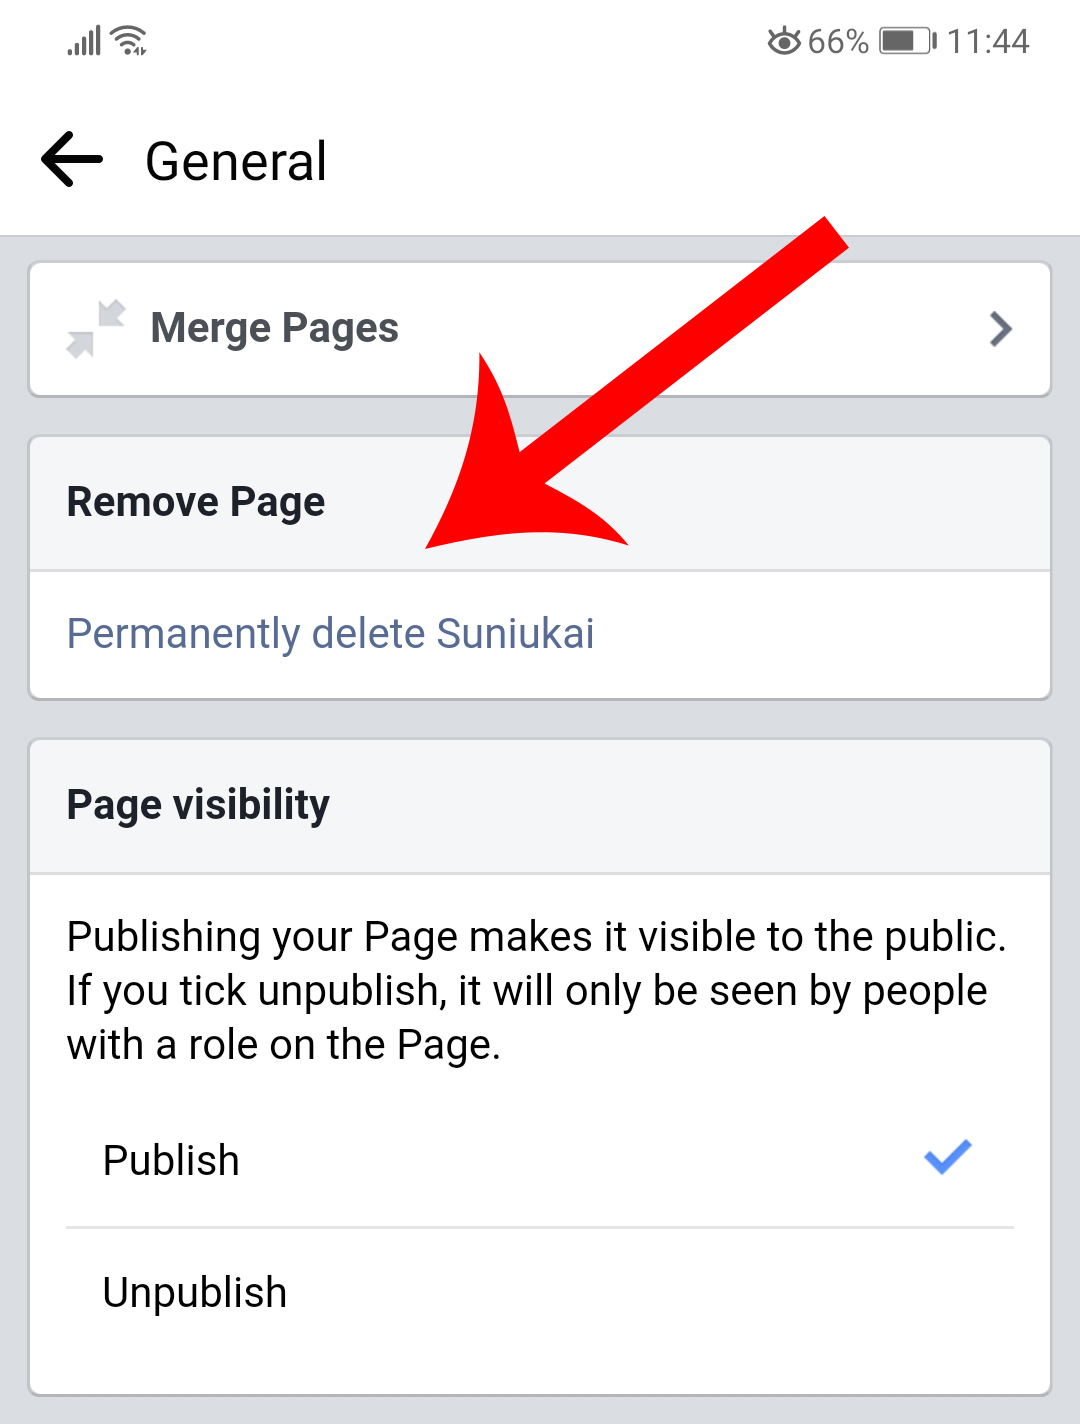 ⛔ How to Delete a Facebook Page in 23 Easy Steps - sixads